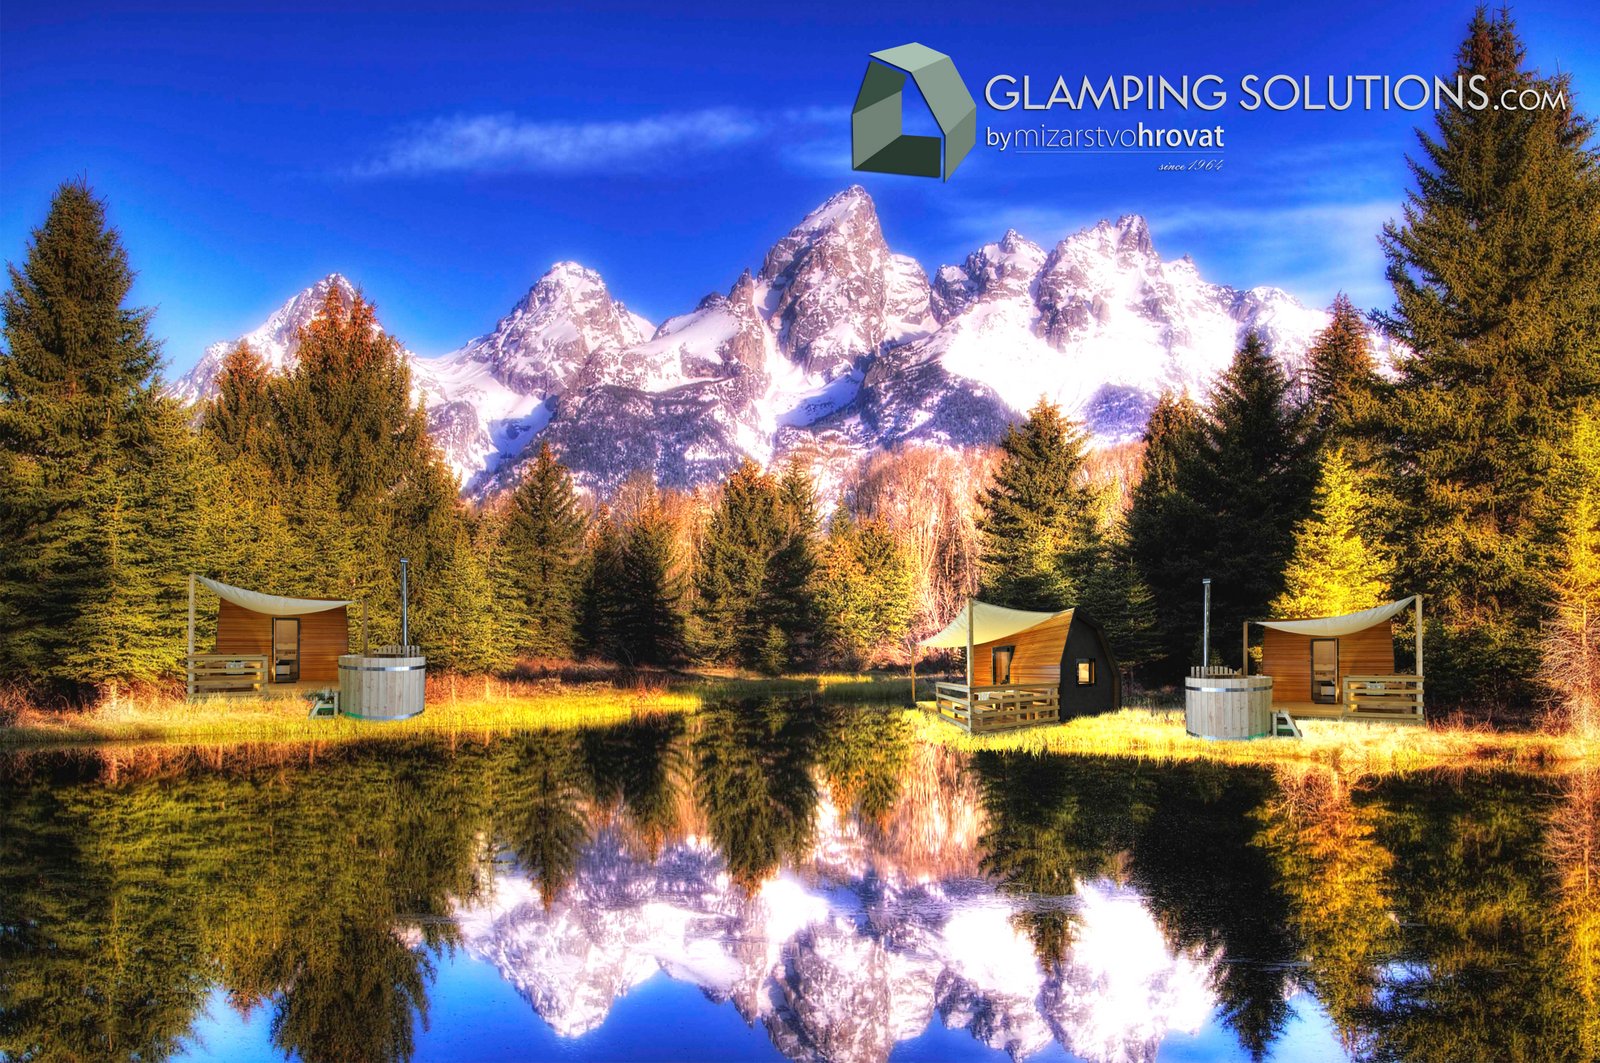 10 pieces of advice on how to improve your glamping destination?